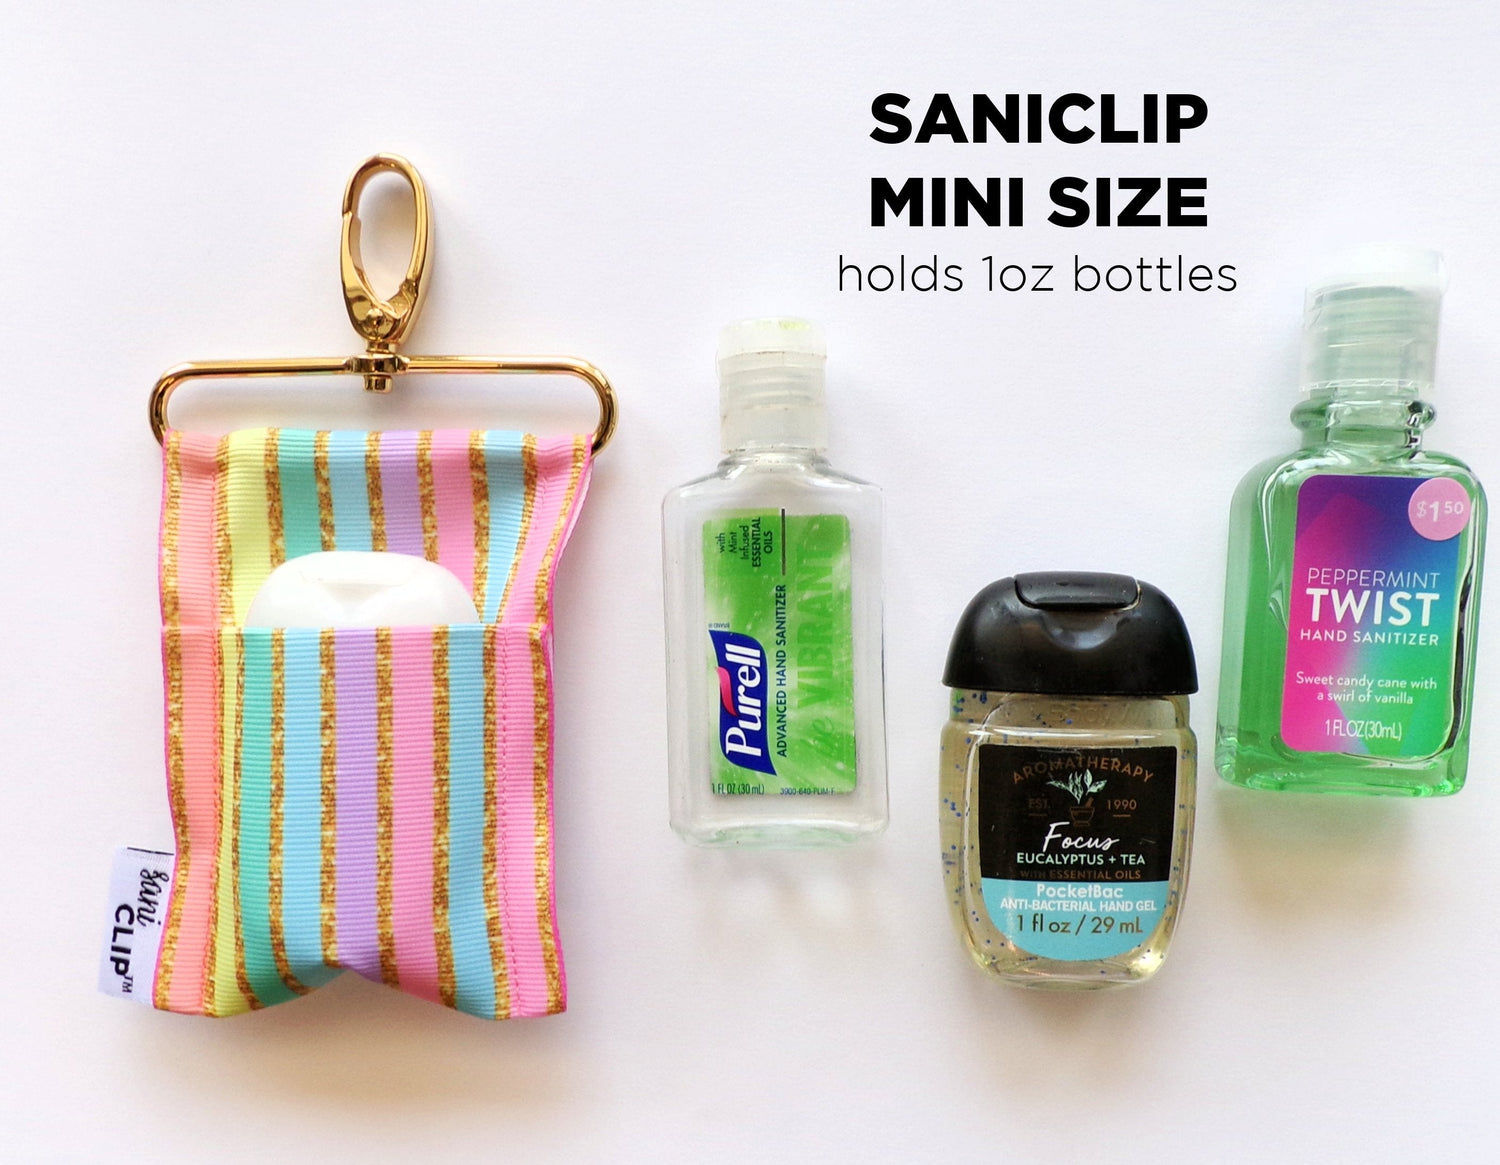 Plant Lady SaniClip (Mini and Standard Size) - Discount Already Applied